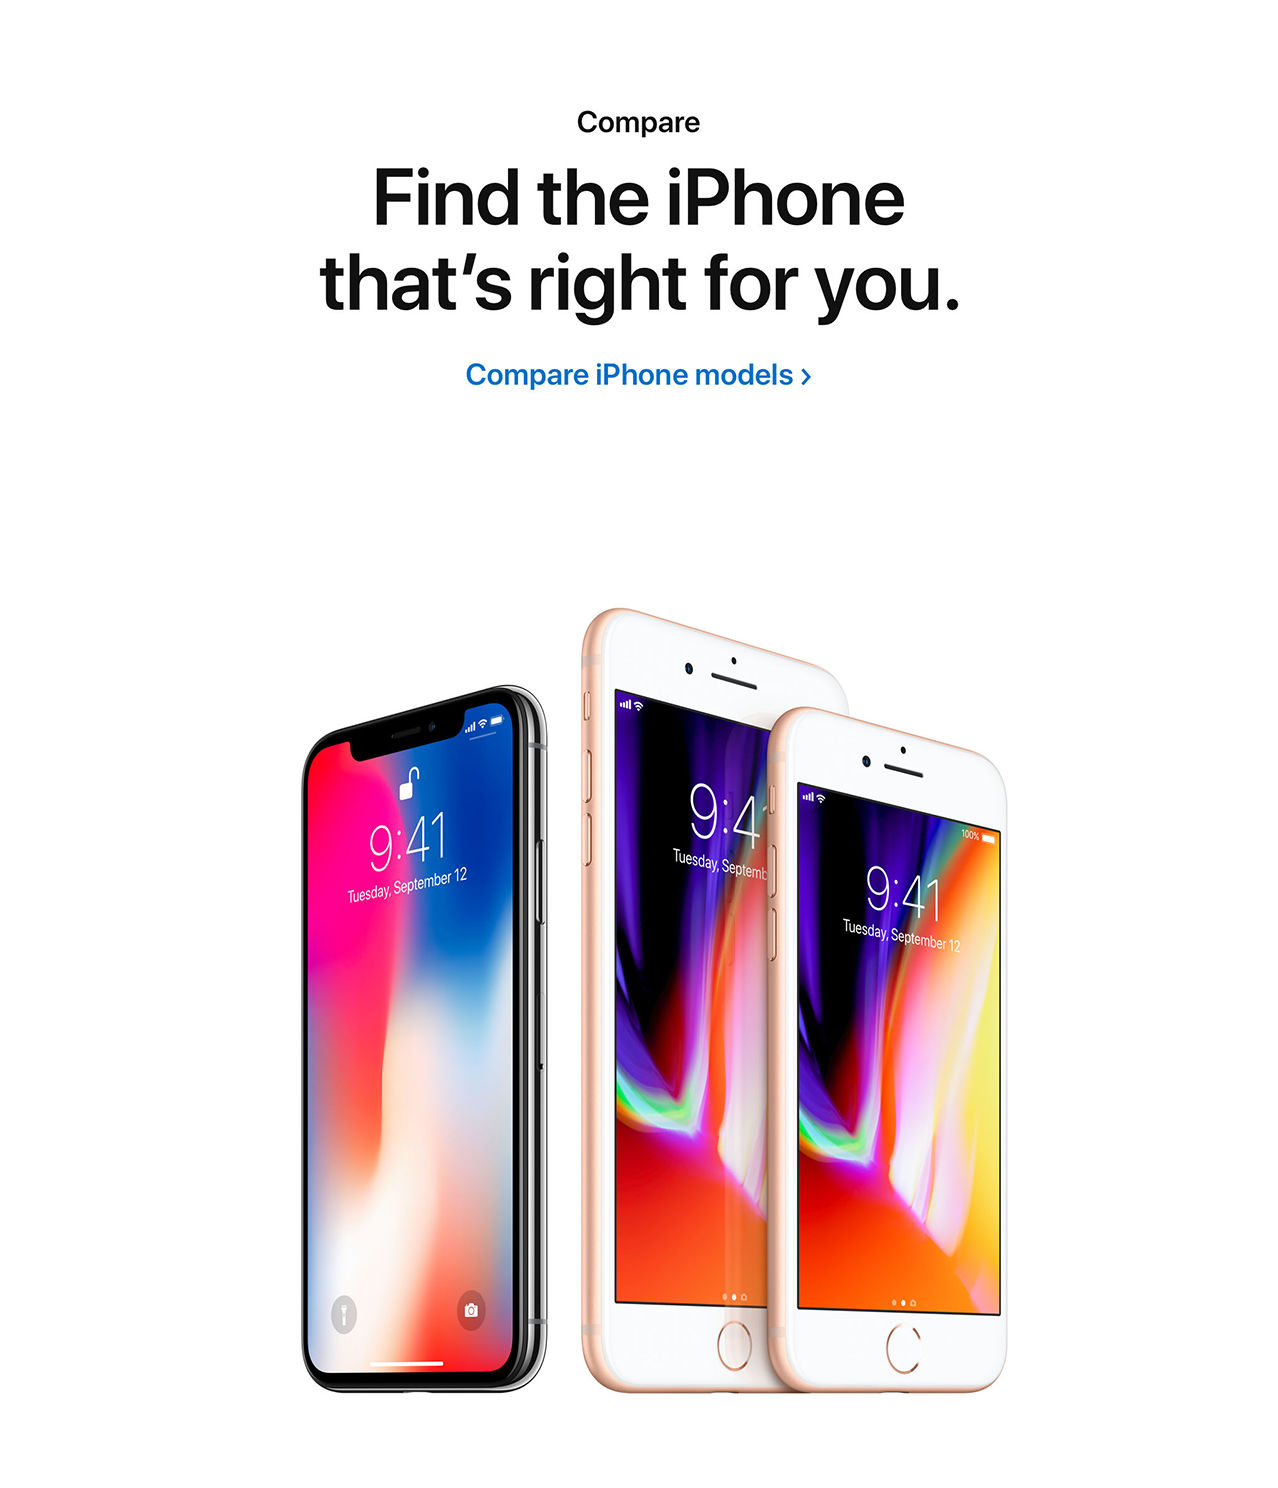 Compare: Find the iPhone that’s right for you. Compare iPhone models.